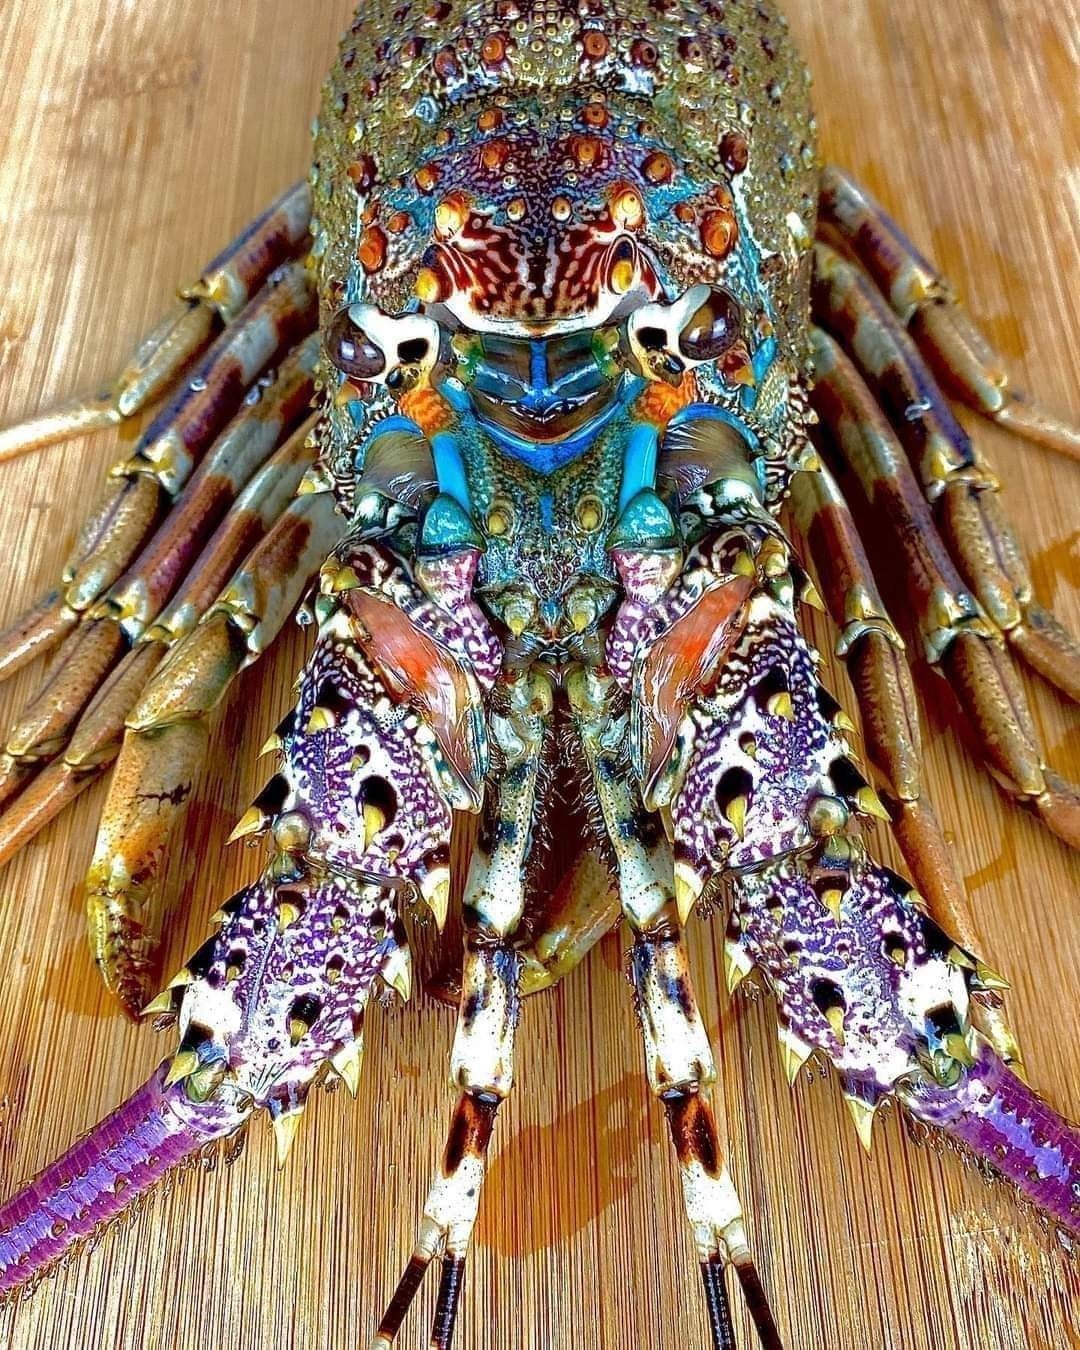 the+rainbow+lobster+is+beautiful